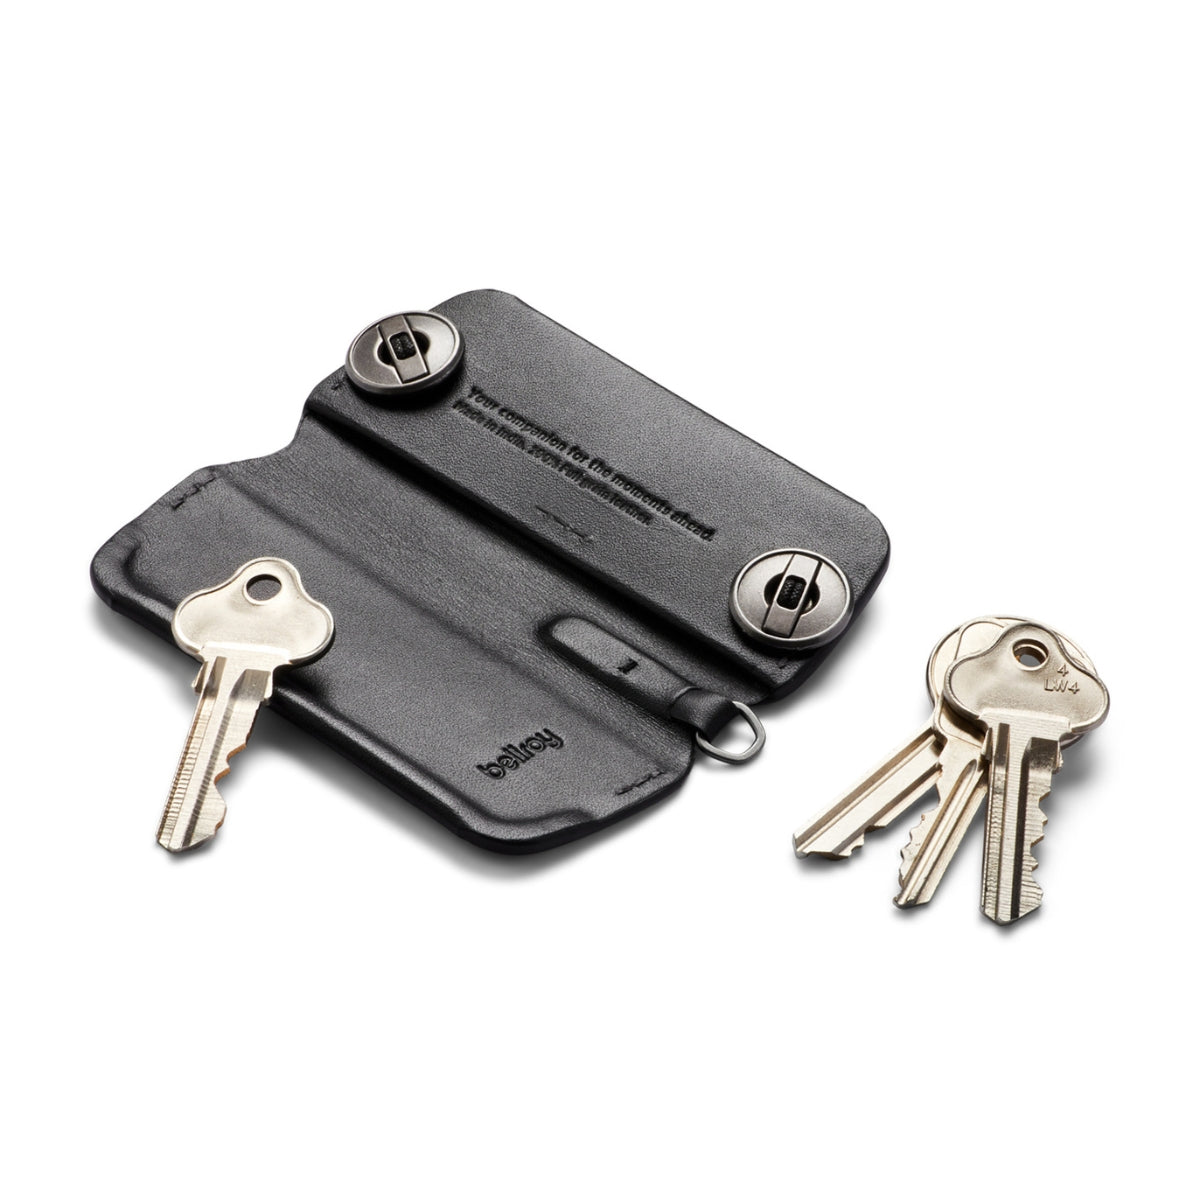 Bellroy Key Cover Plus (Third Edition) in Black